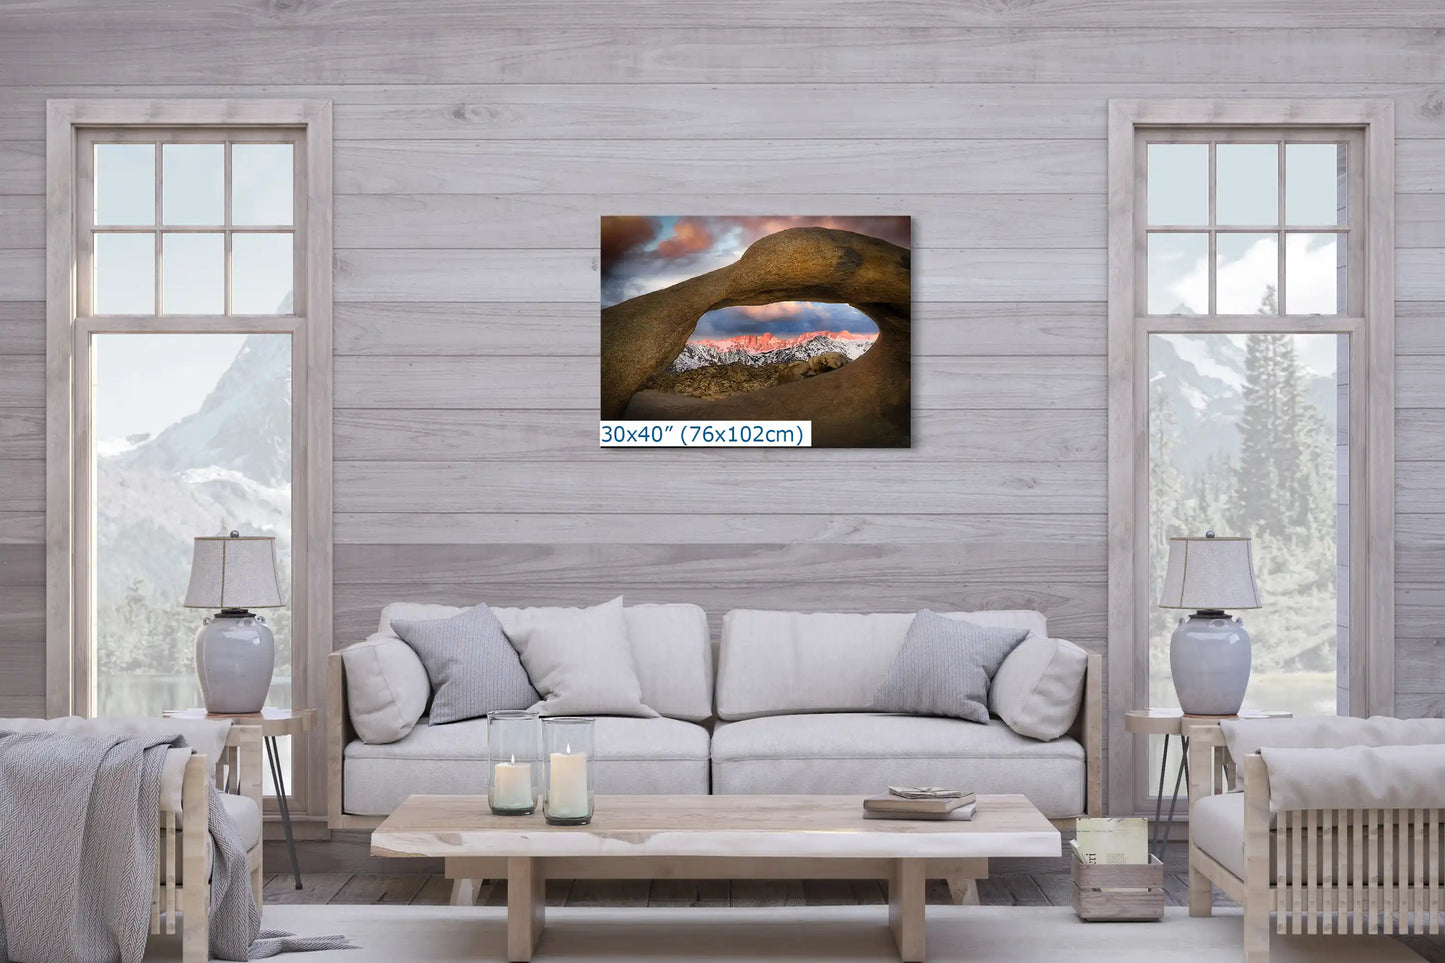 Large 30x40 canvas showcasing Mount Whitney through Mobius Arch, creating a calming focal point in a cozy living room setting.